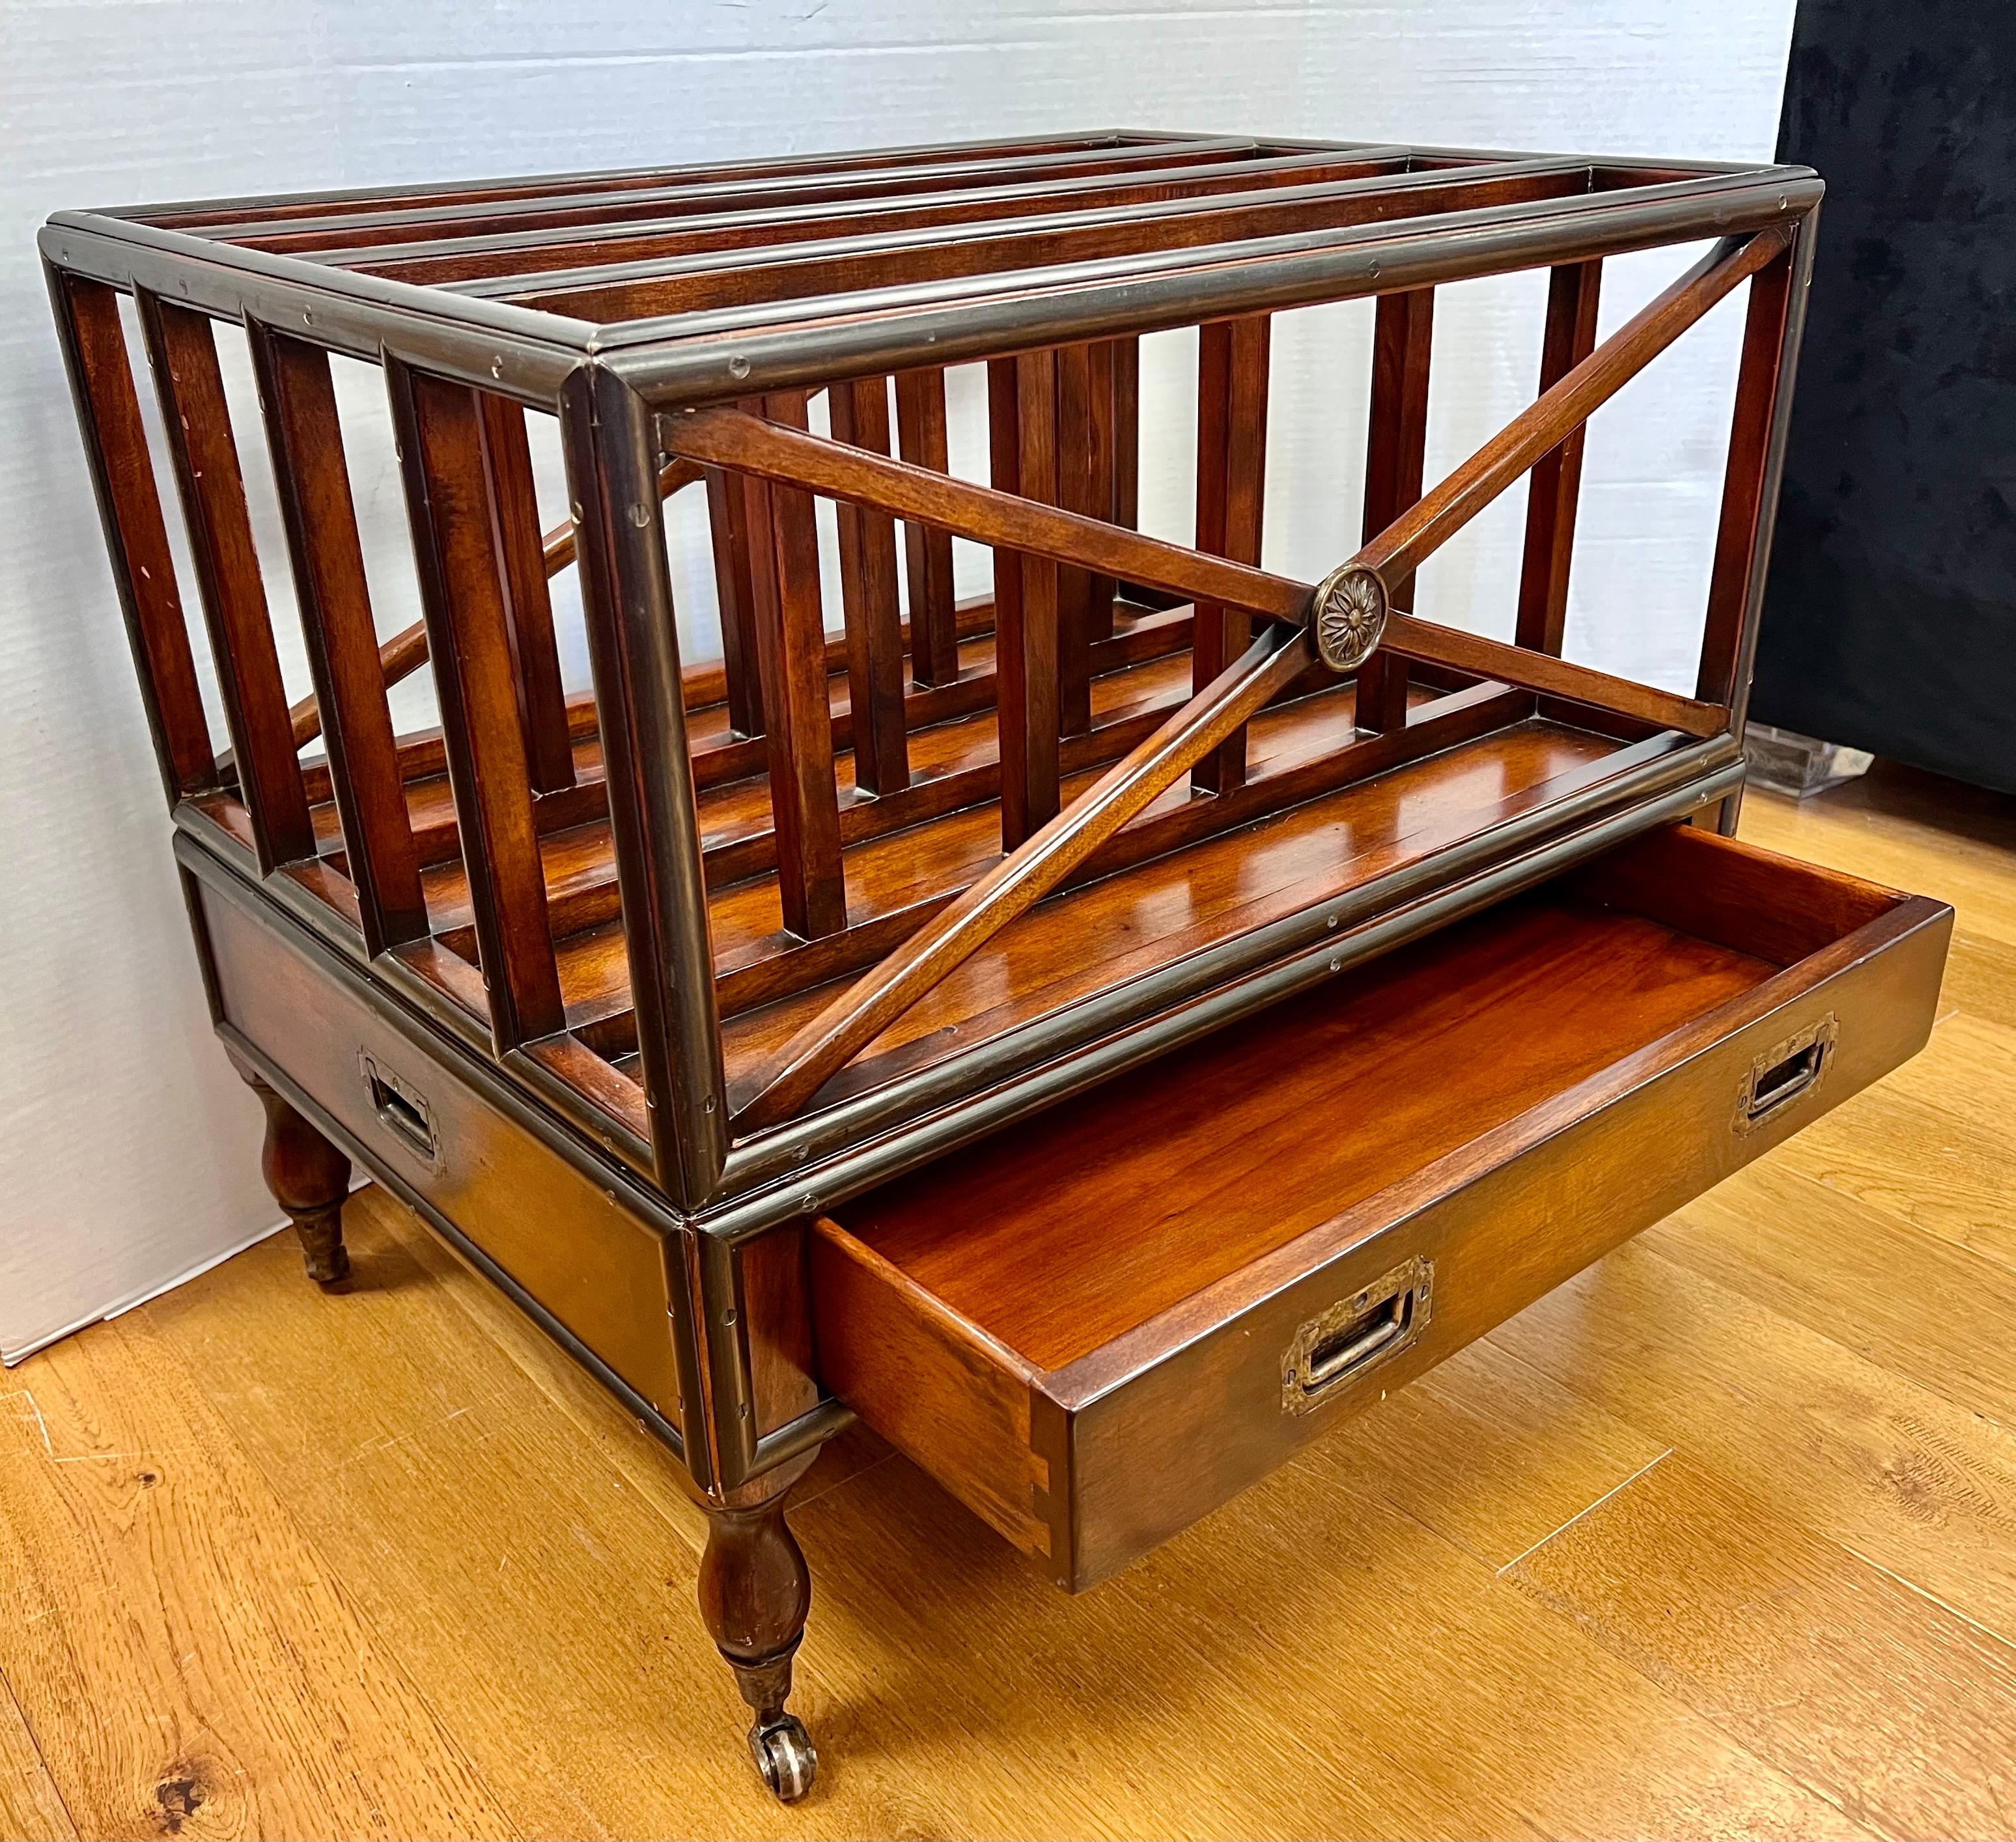 Elegant, signed Theodore Alexander magazine rack which is based on the original design from the 1800s to store sheet music. The piece is perfect for storing magazines, books or vinyl. The luxurious mahogany frame has four divisions and sports a